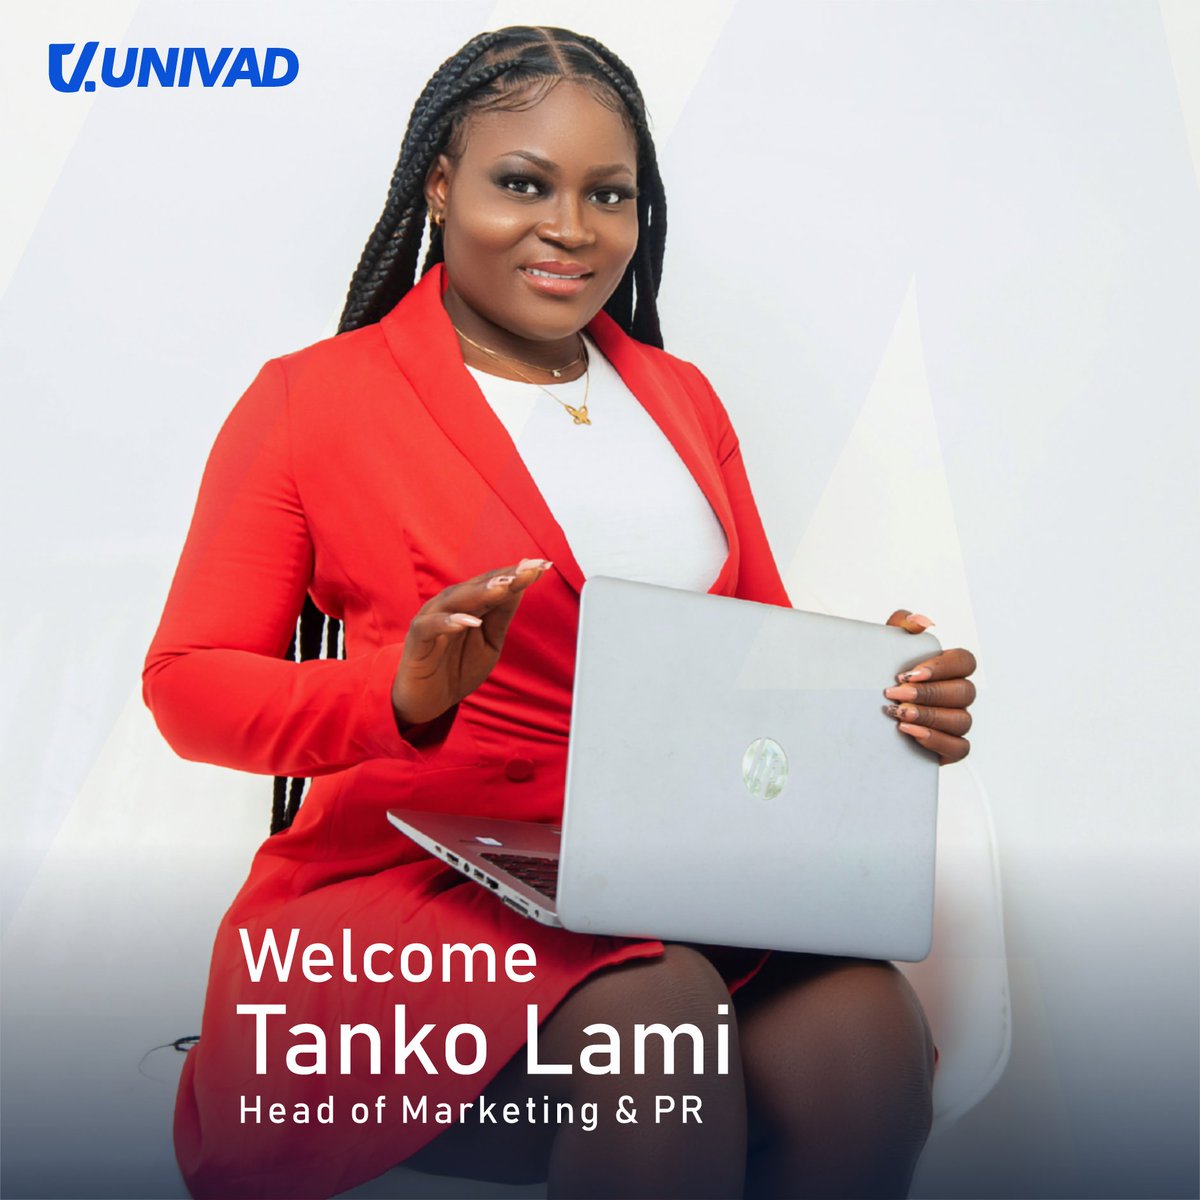 Excited to welcome Tanko Lami as our new Head of Marketing and PR! 🎉 With 11+ years of experience, Lami brings a stellar track record. Her past roles and experiences will be key in achieving our goals of making quality education accessible to all Africans. Welcome aboard! 🚀